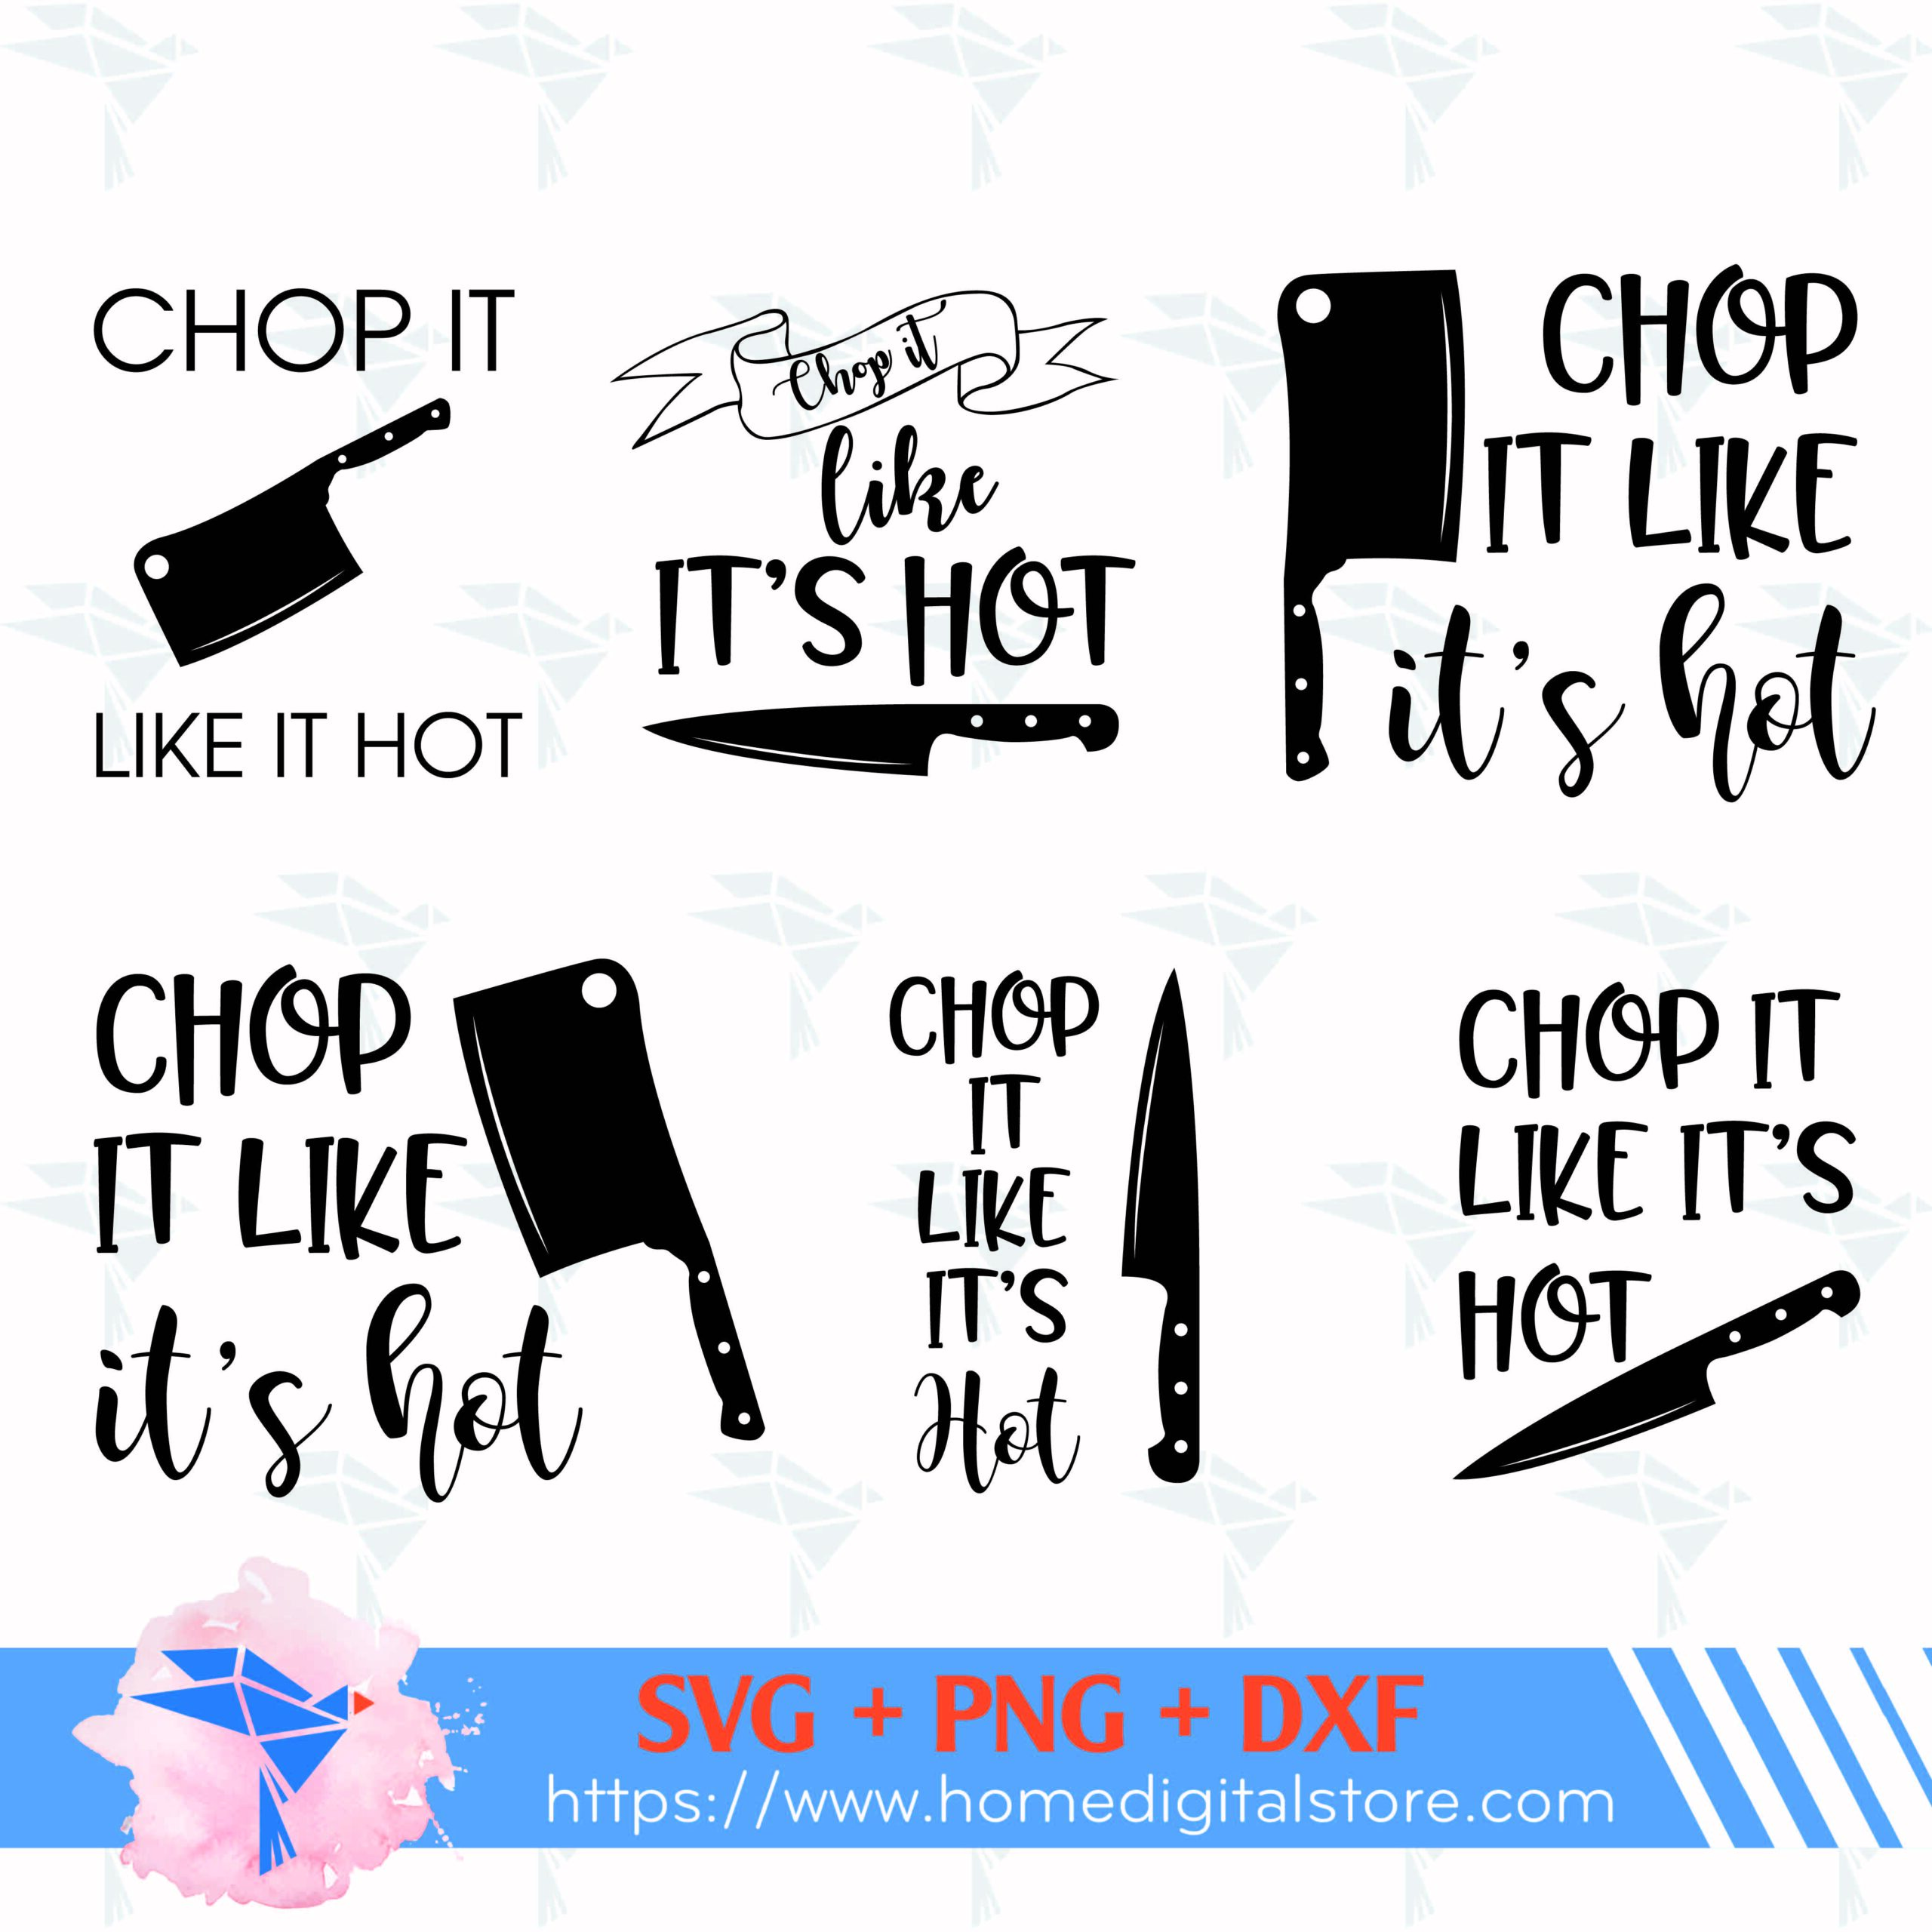 Chop It Like Hot SVG, PNG, DXF